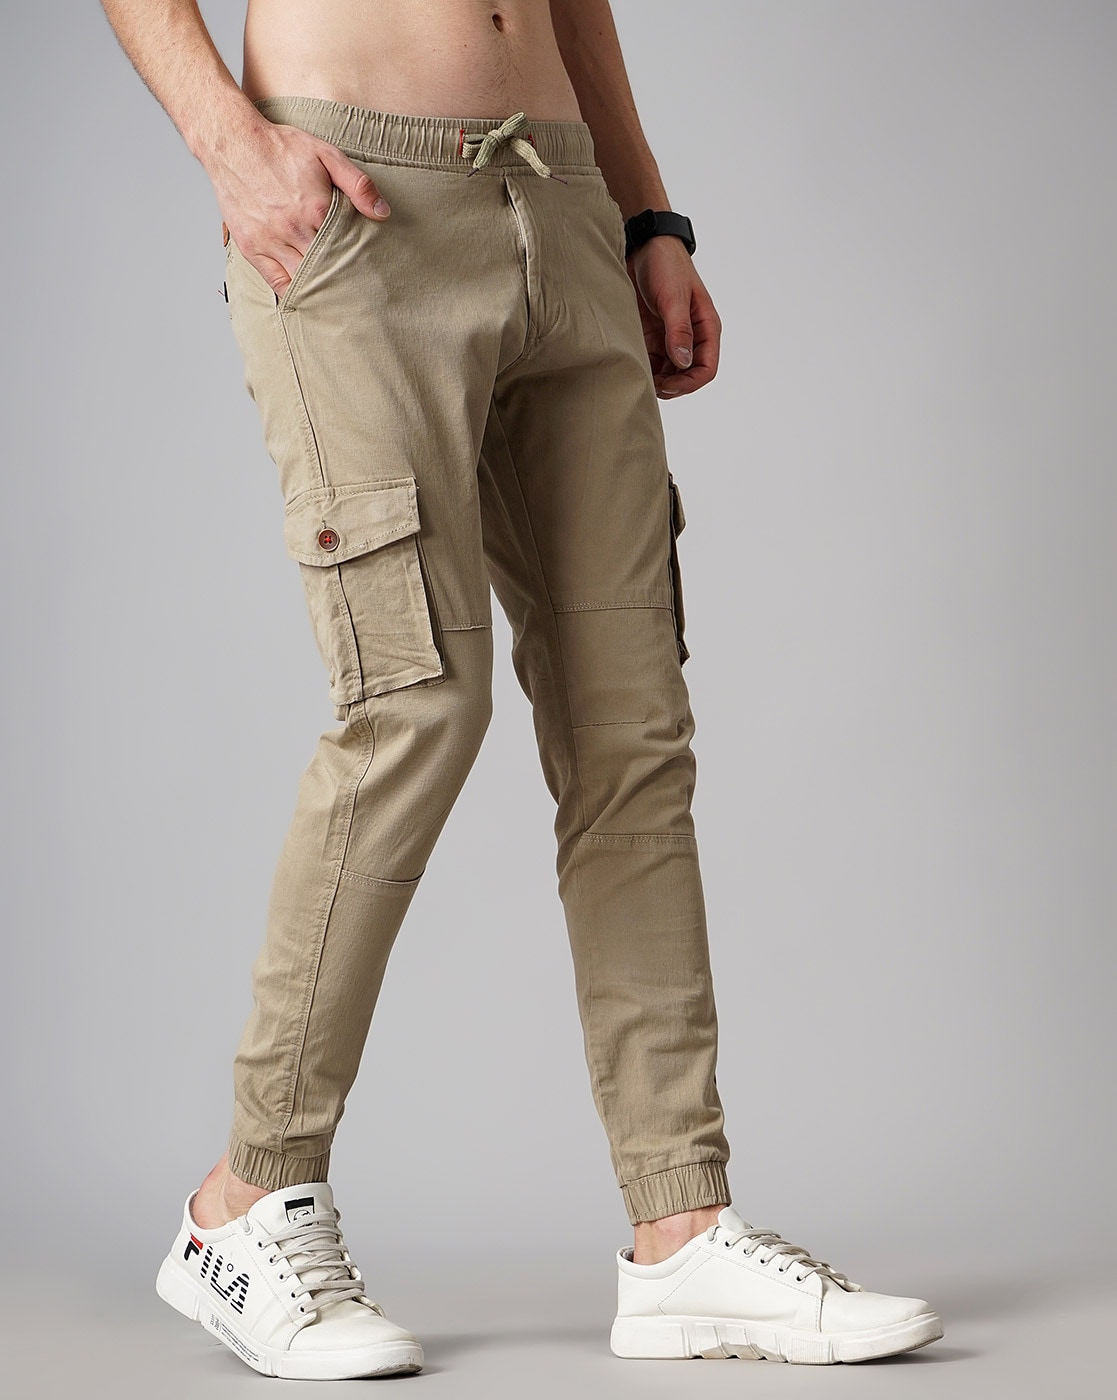 CargoCasual easy to wear comfortable cargo pants for Men